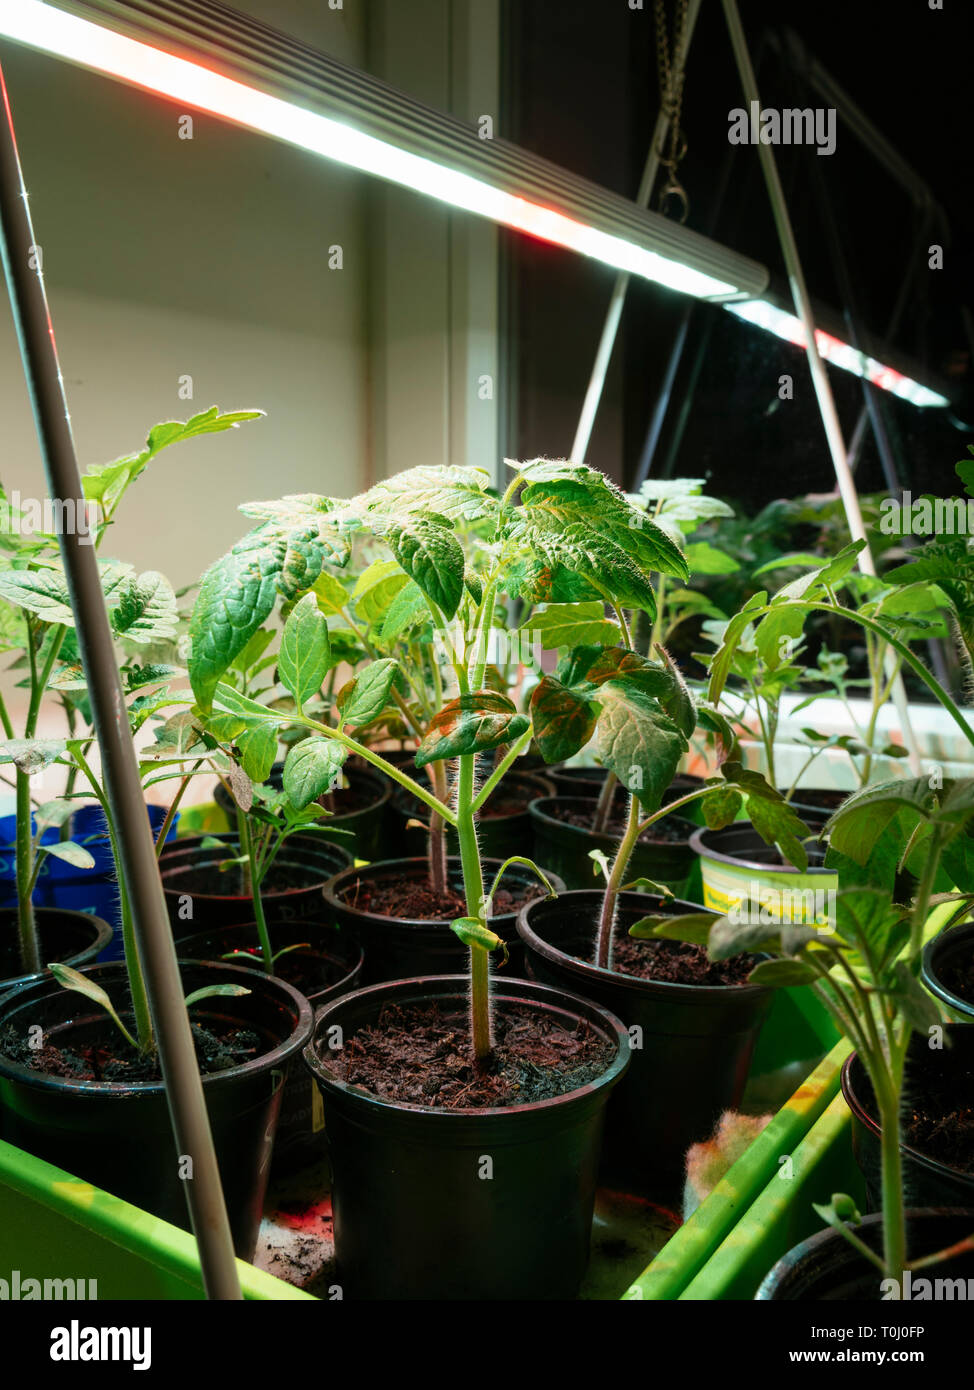 Tomato seedlings growing indoors on a window sill under a grow light. Stock Photo